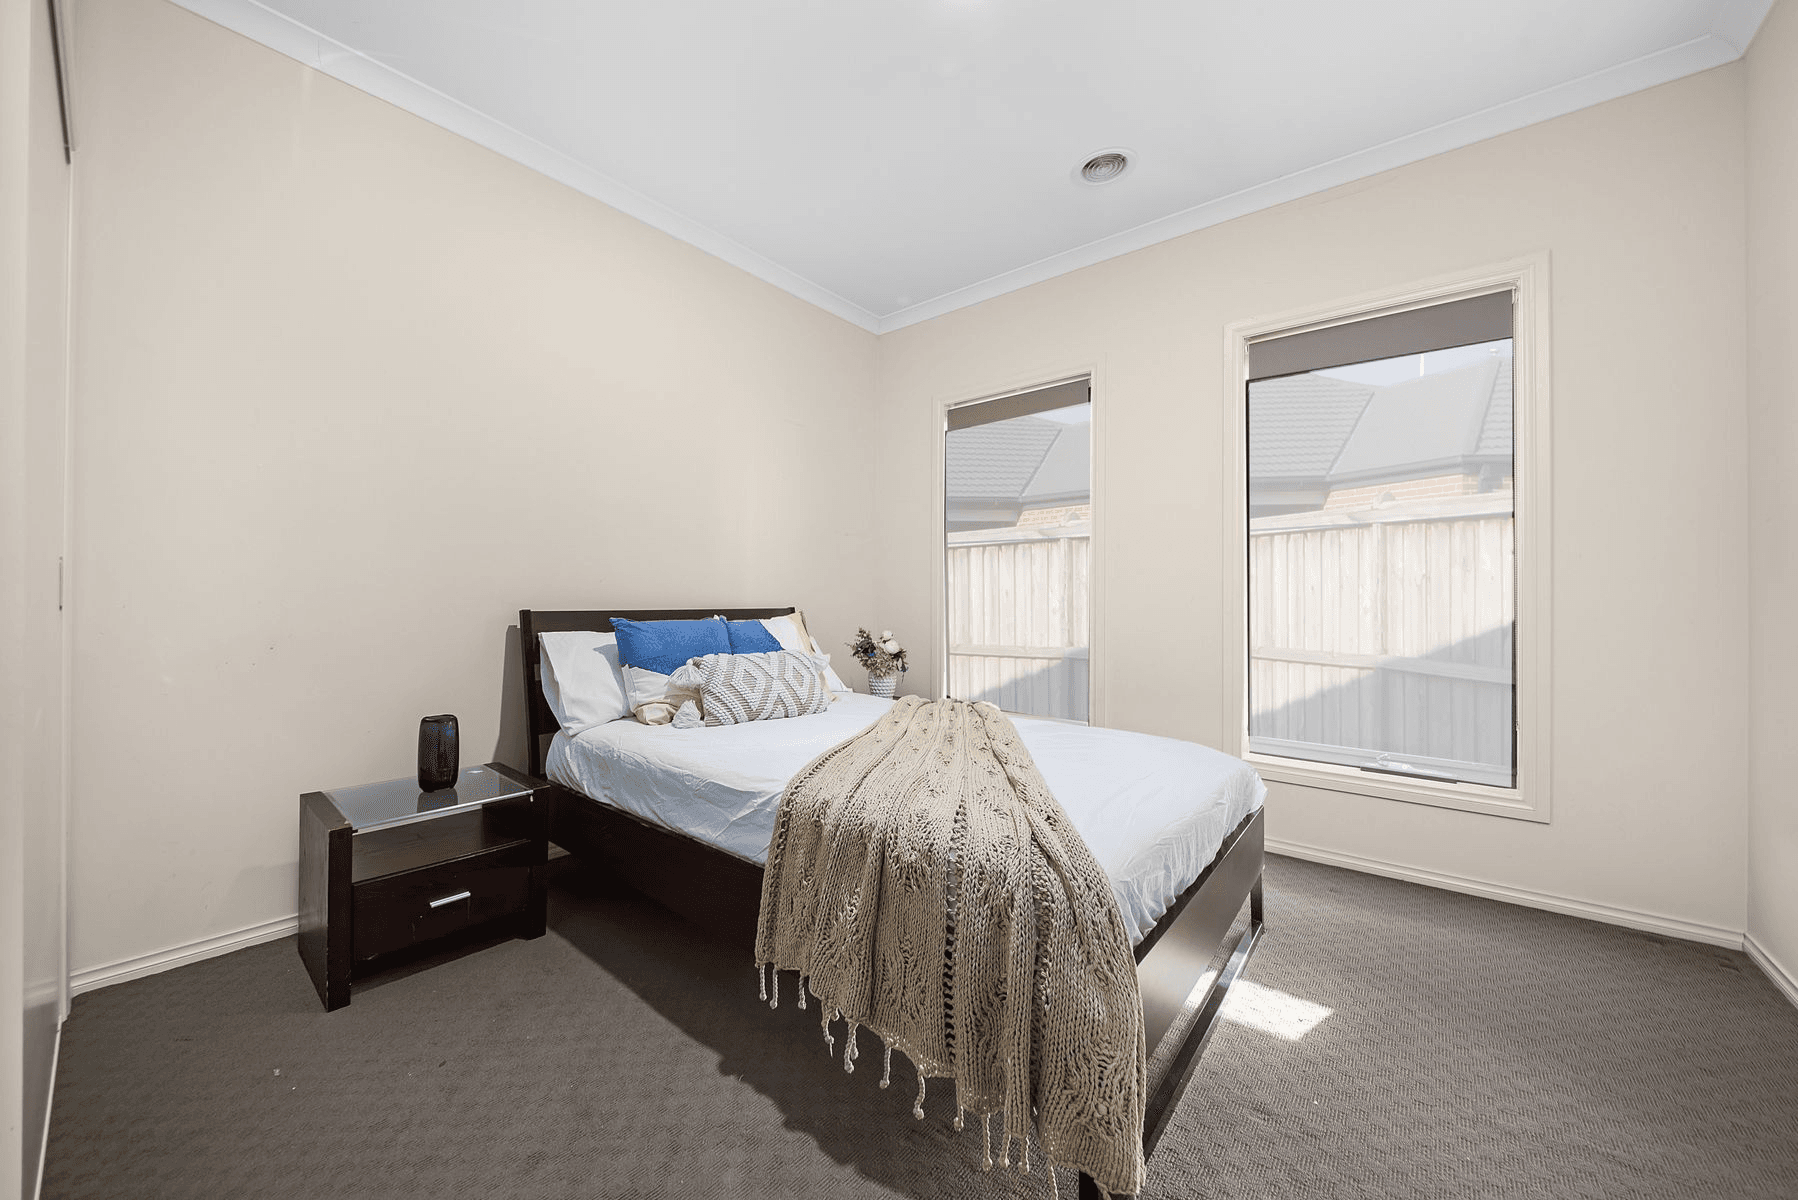 24 Rowling Drive, OFFICER, VIC 3809